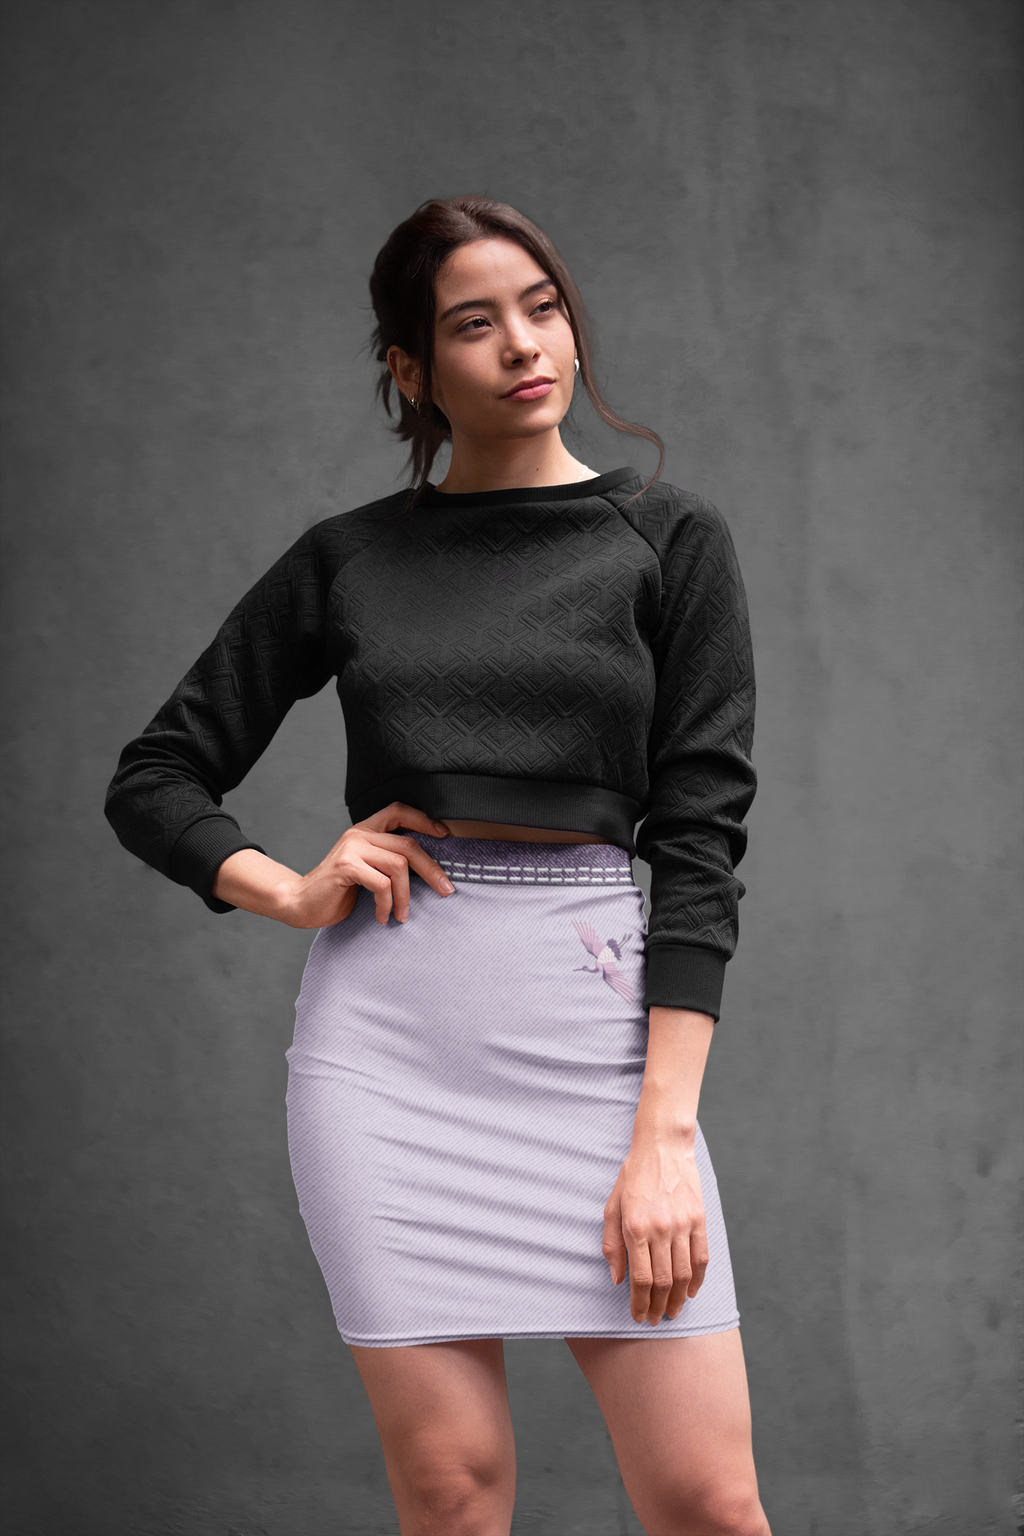 pencil-skirt-mockup-featuring-a-woman-posing-against-a-textured-background-28664.png